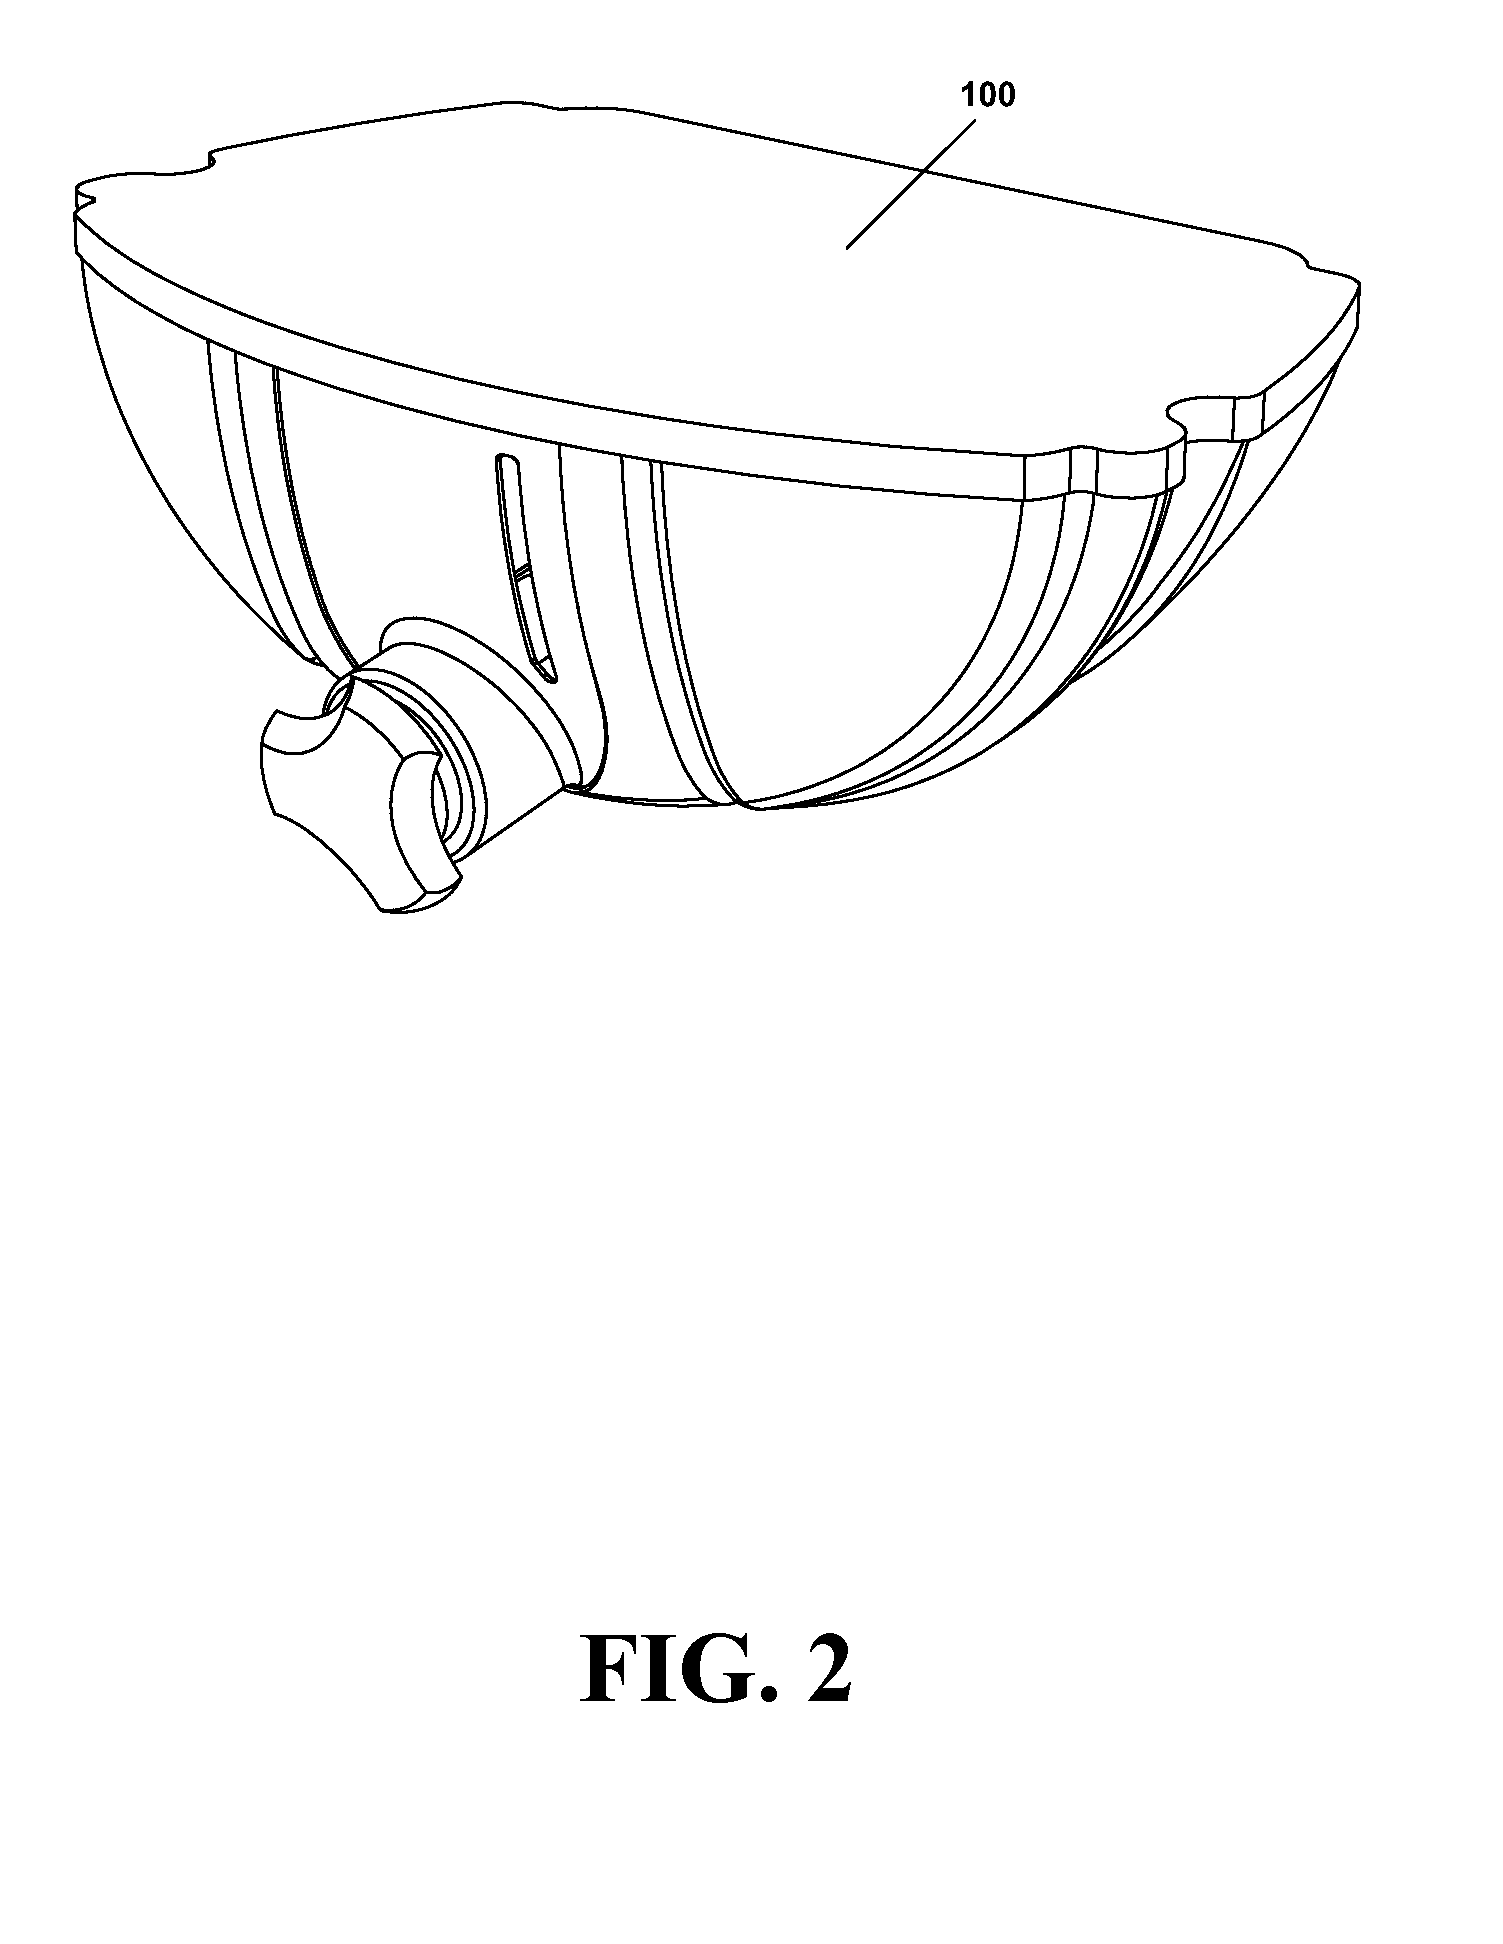 Storage dispenser apparatus for aids, consumables and utensils